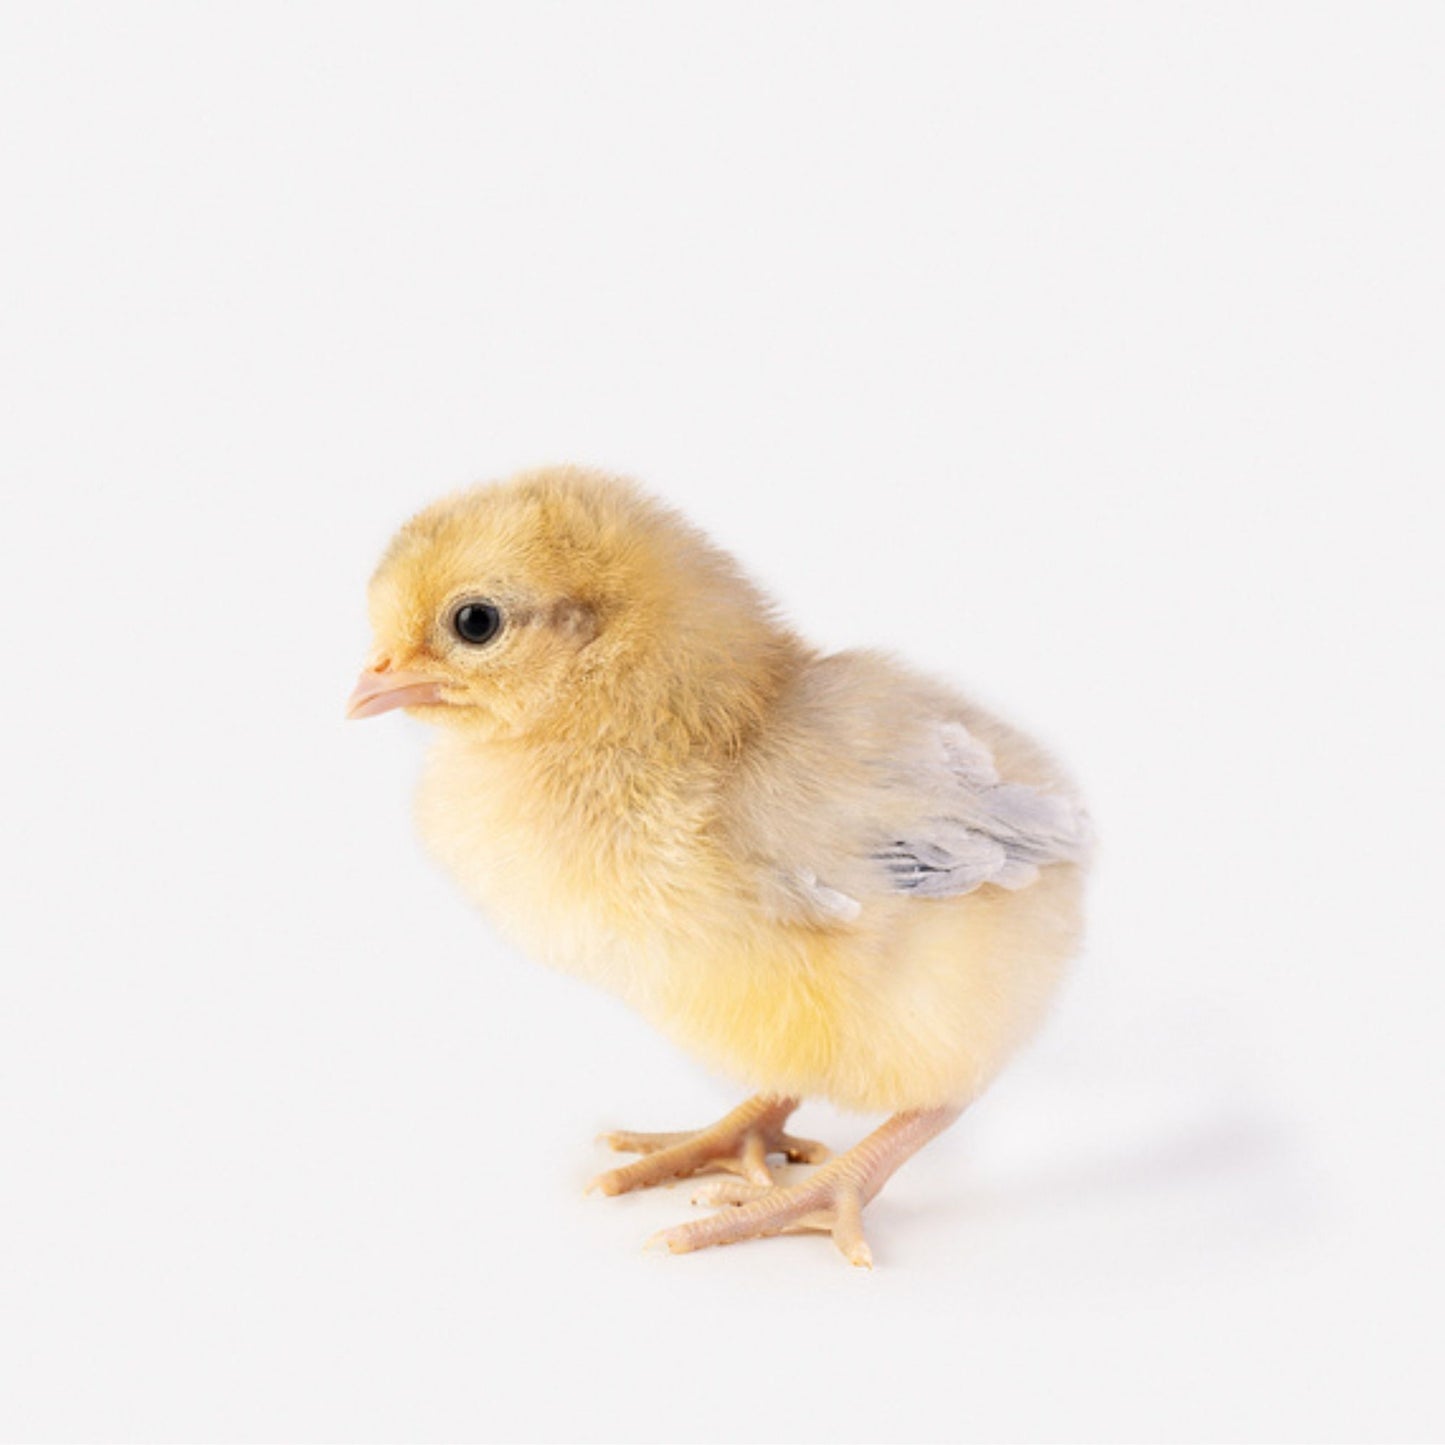 Opal Legbar baby chickens for sale. 